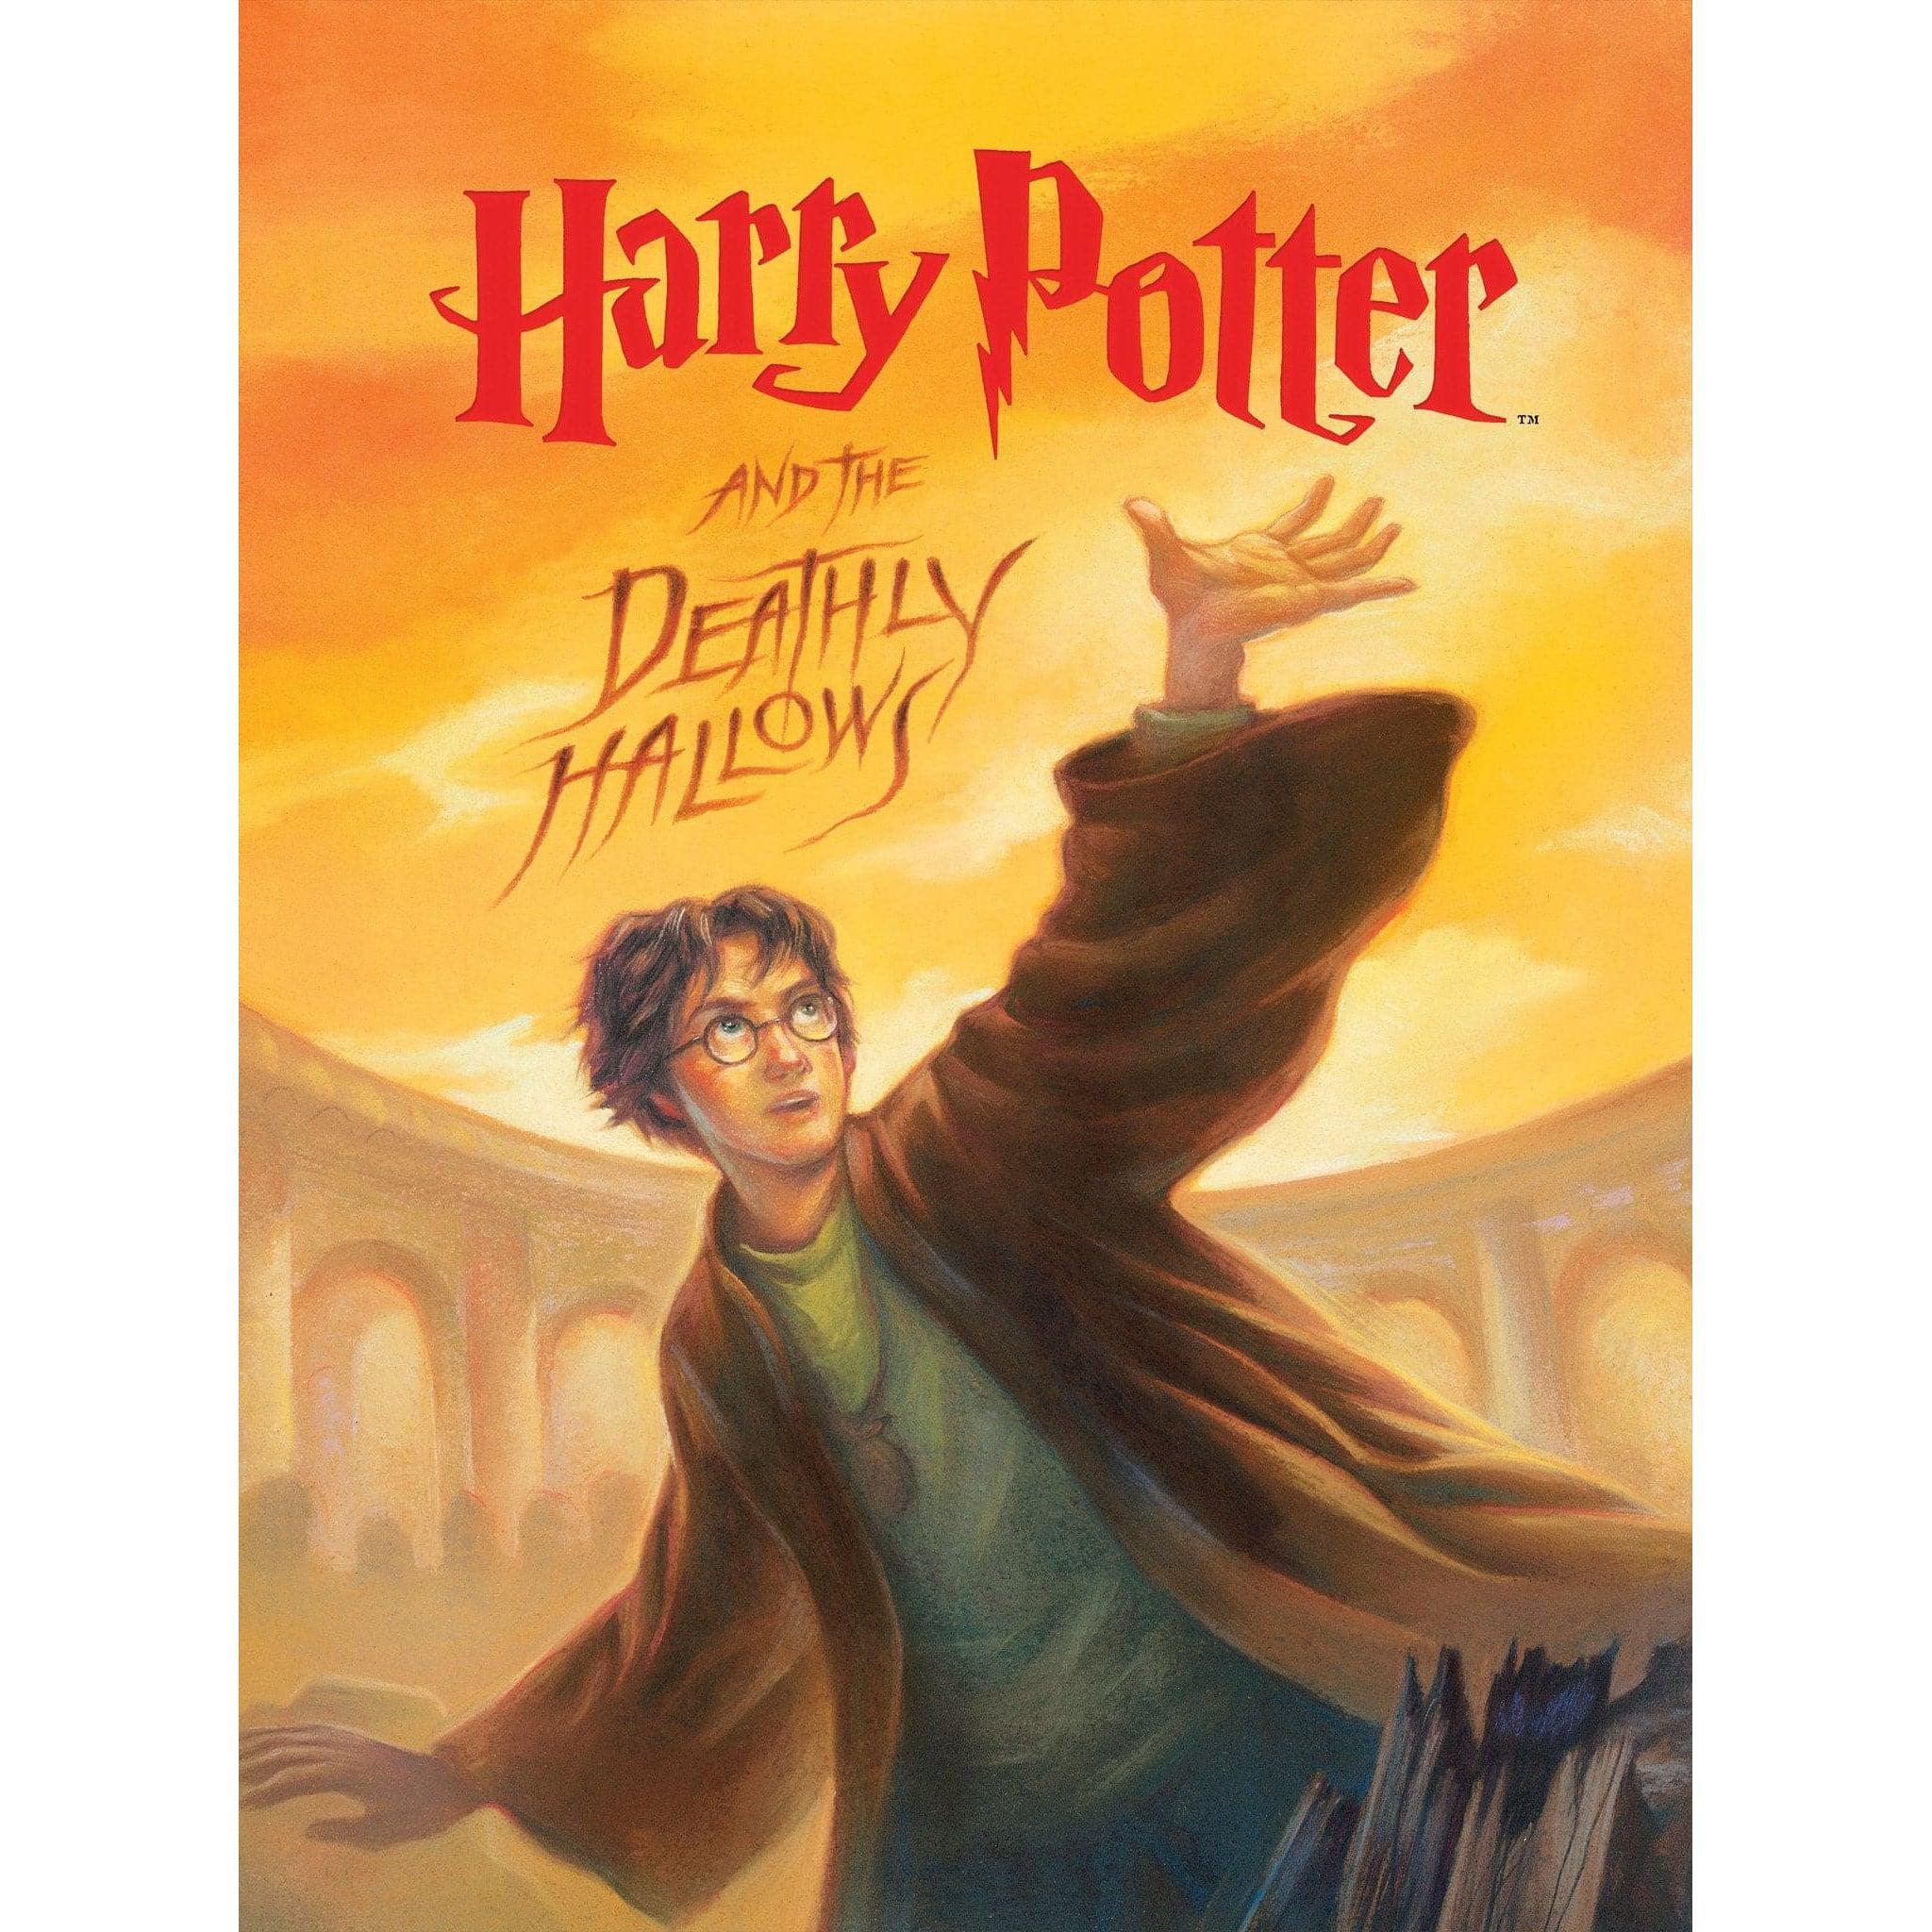 New York Puzzle Company-Harry Potter - Deathly Hallows Puzzle - 1,000 Piece Puzzle-NPZHP1607-Legacy Toys